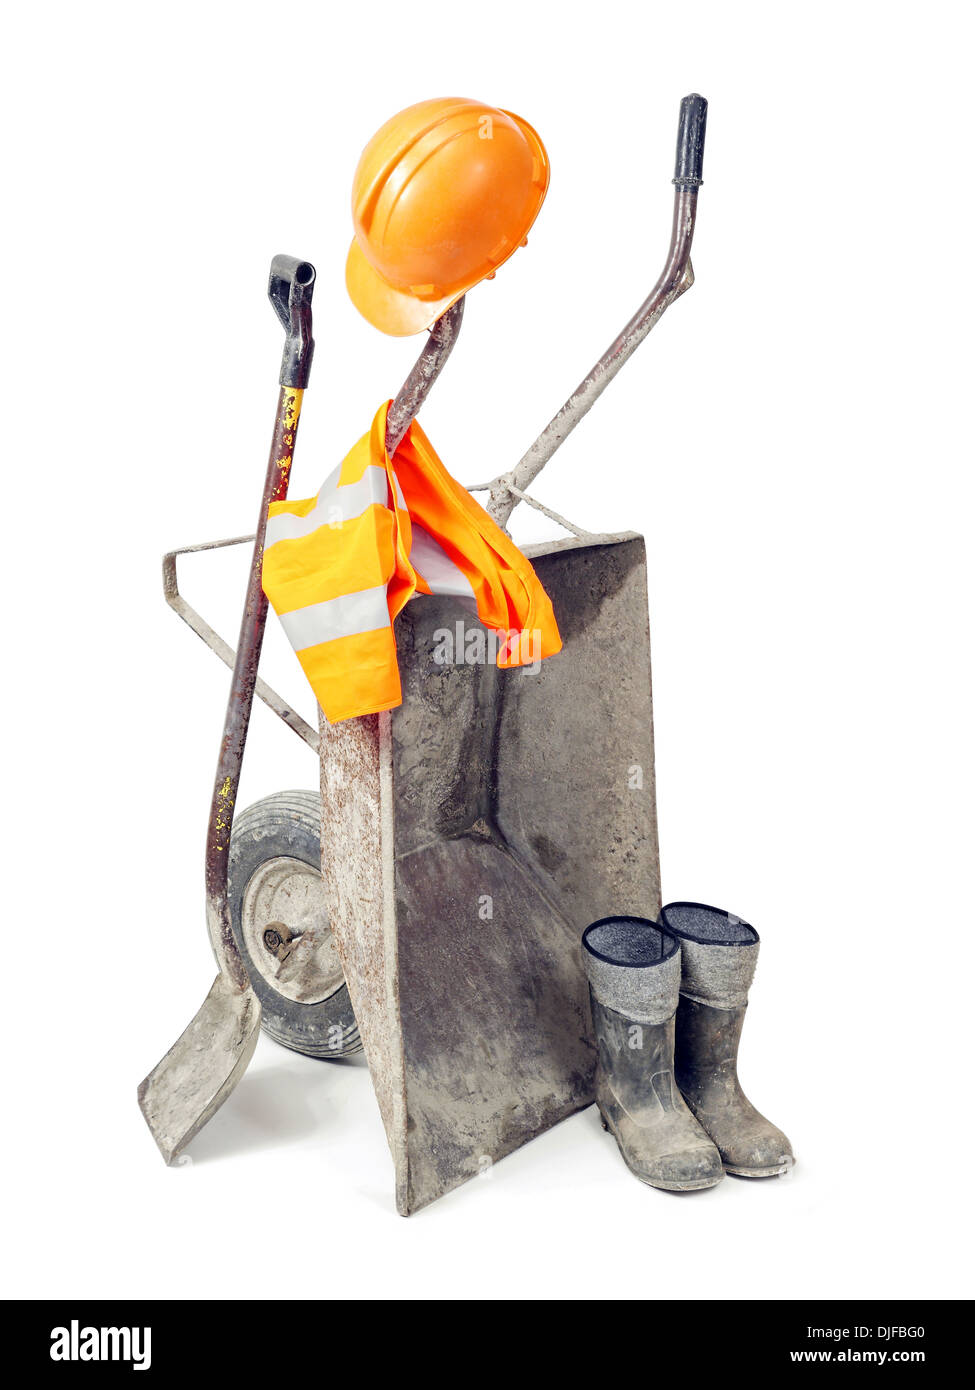 Basic bulider's equipment comprising wheel barrow, pair of wellingtons, shovel, hard hat and reflective safety vest all shot on Stock Photo